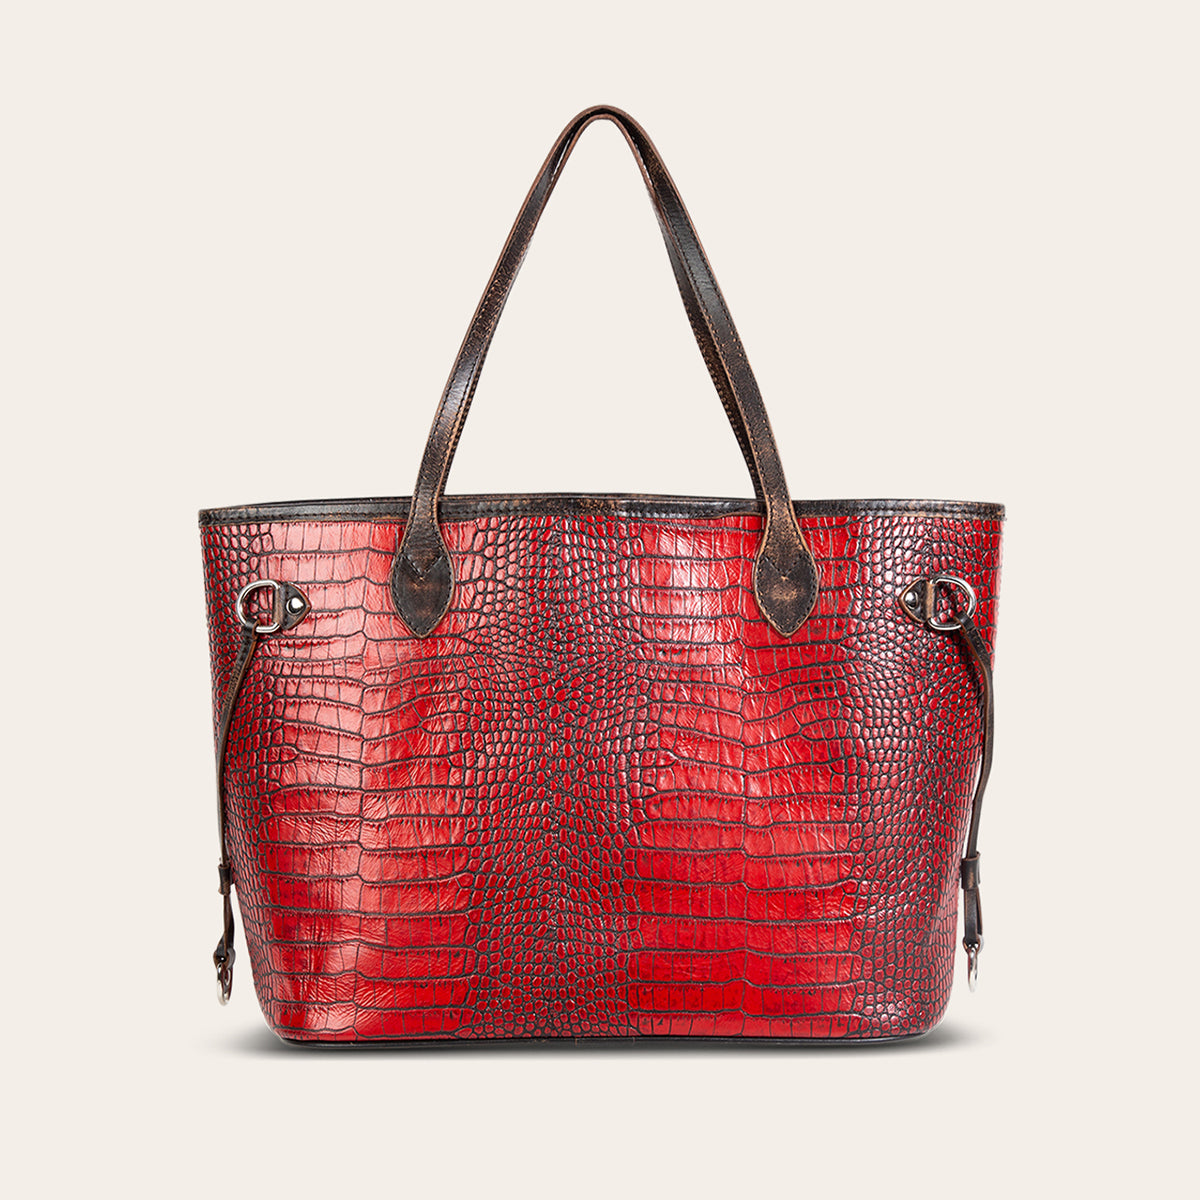 FREEBIRD Mara red croco embossed leather tote bag with top handles and interior zip pocket